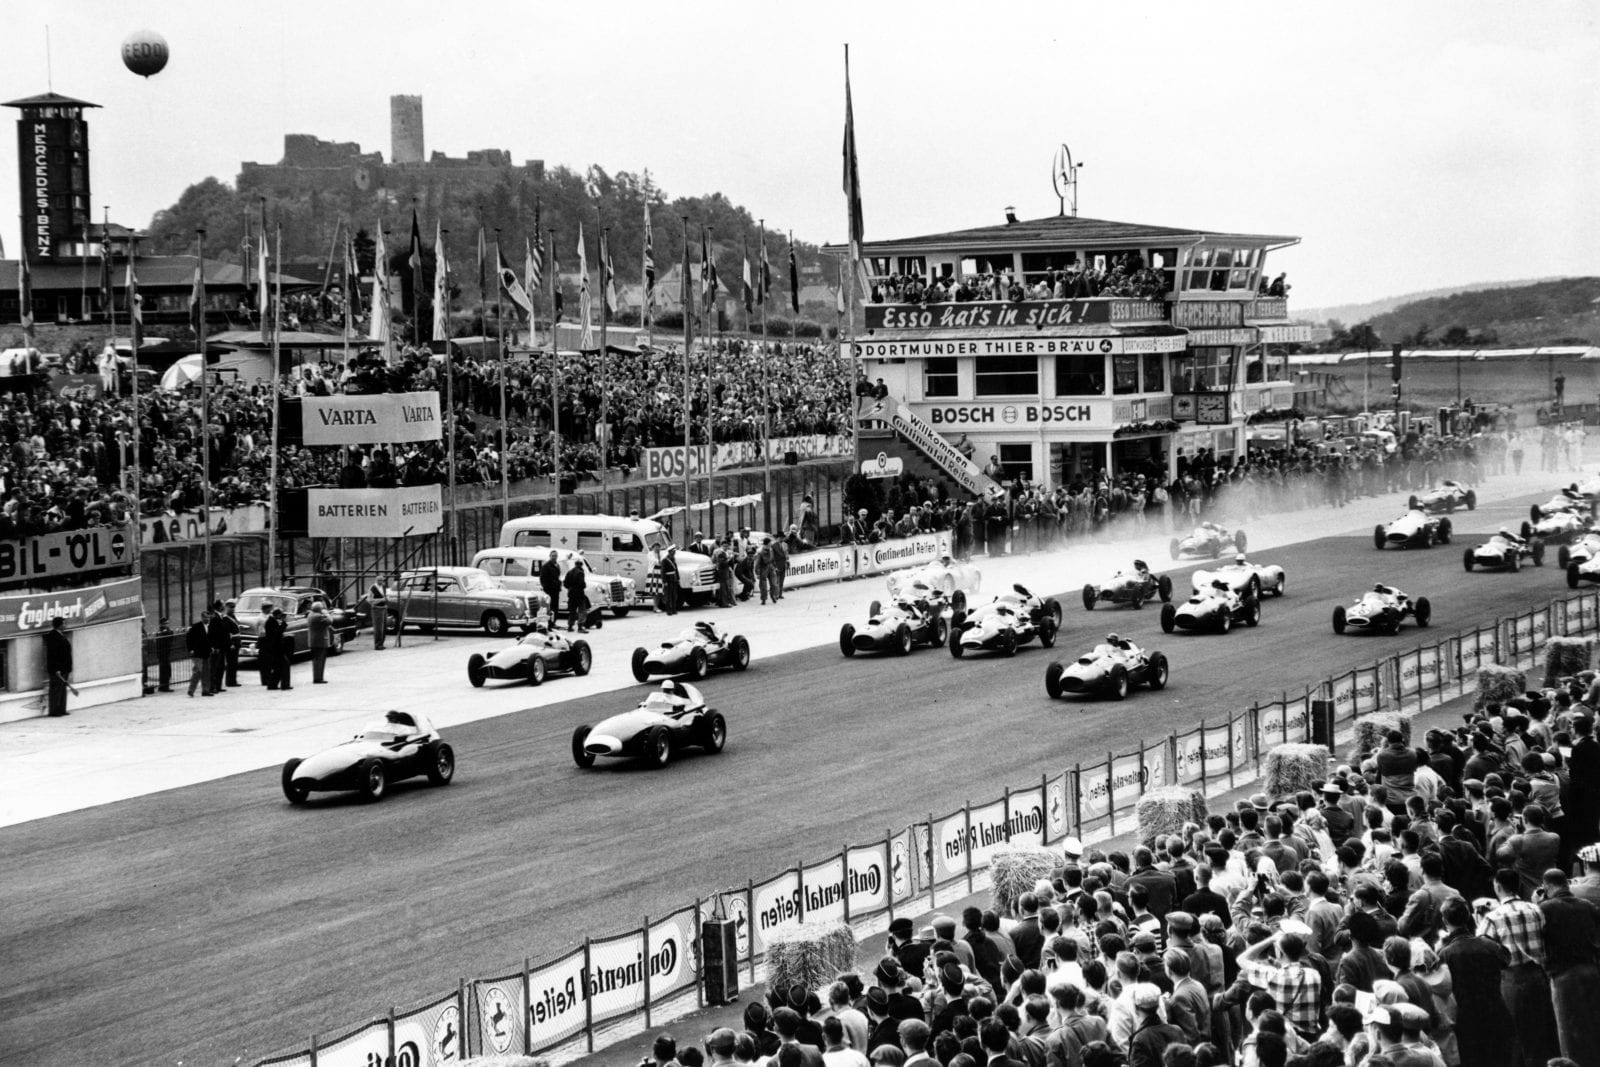 Cars on the grid at the start of the race.